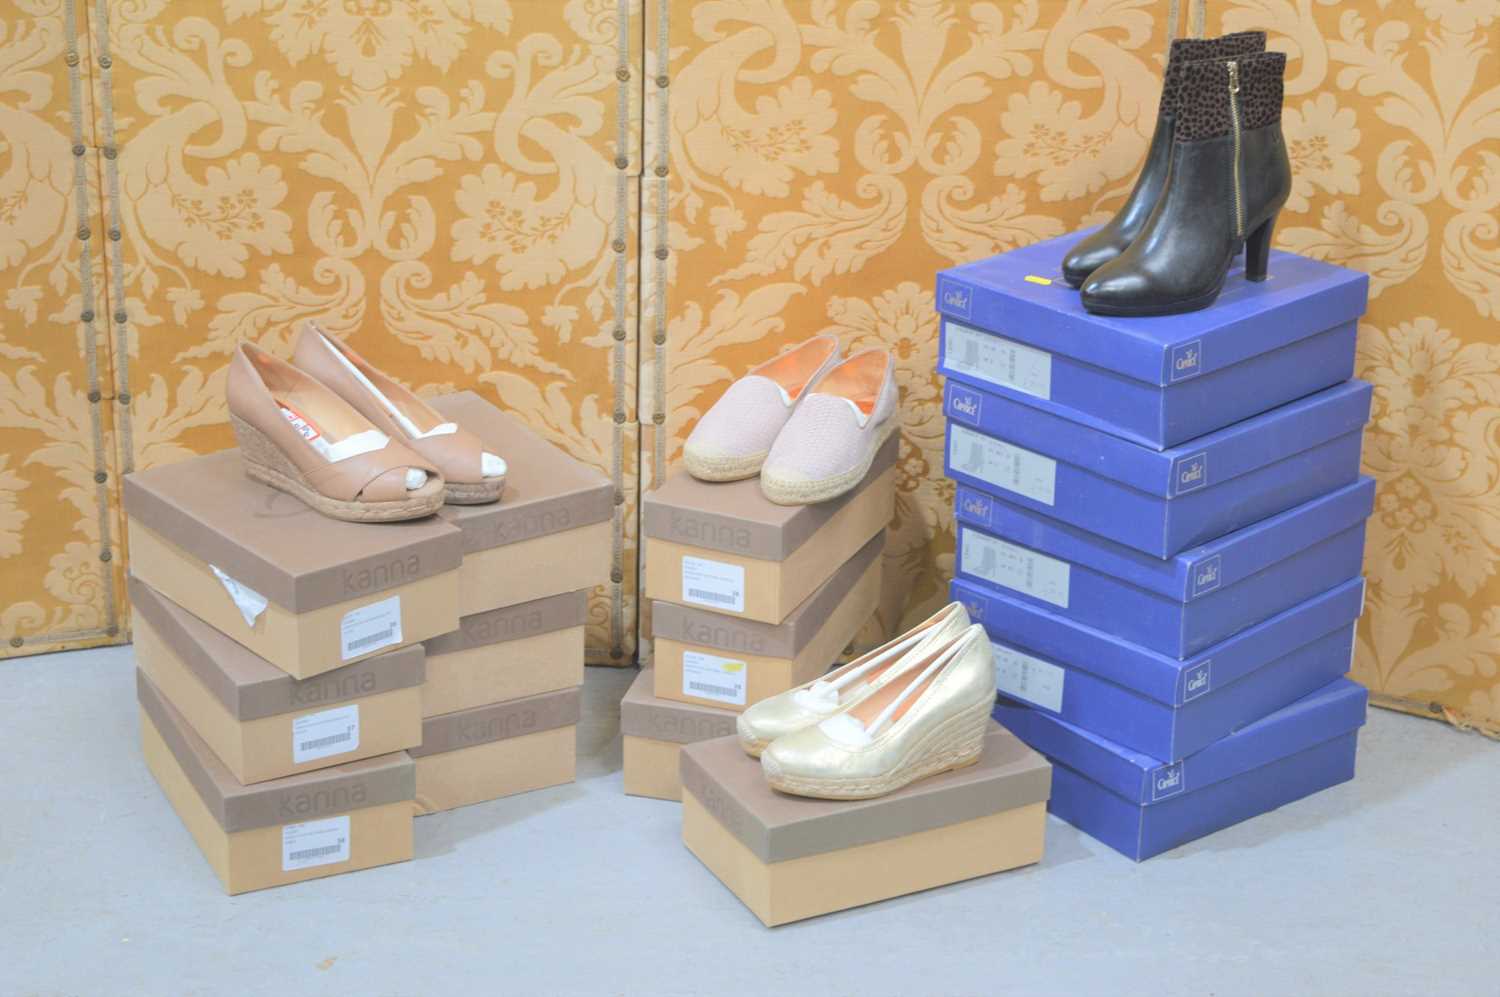 Fifteen pairs of brand new ladies shoes, various sizes and brands to include Kana and Caprice